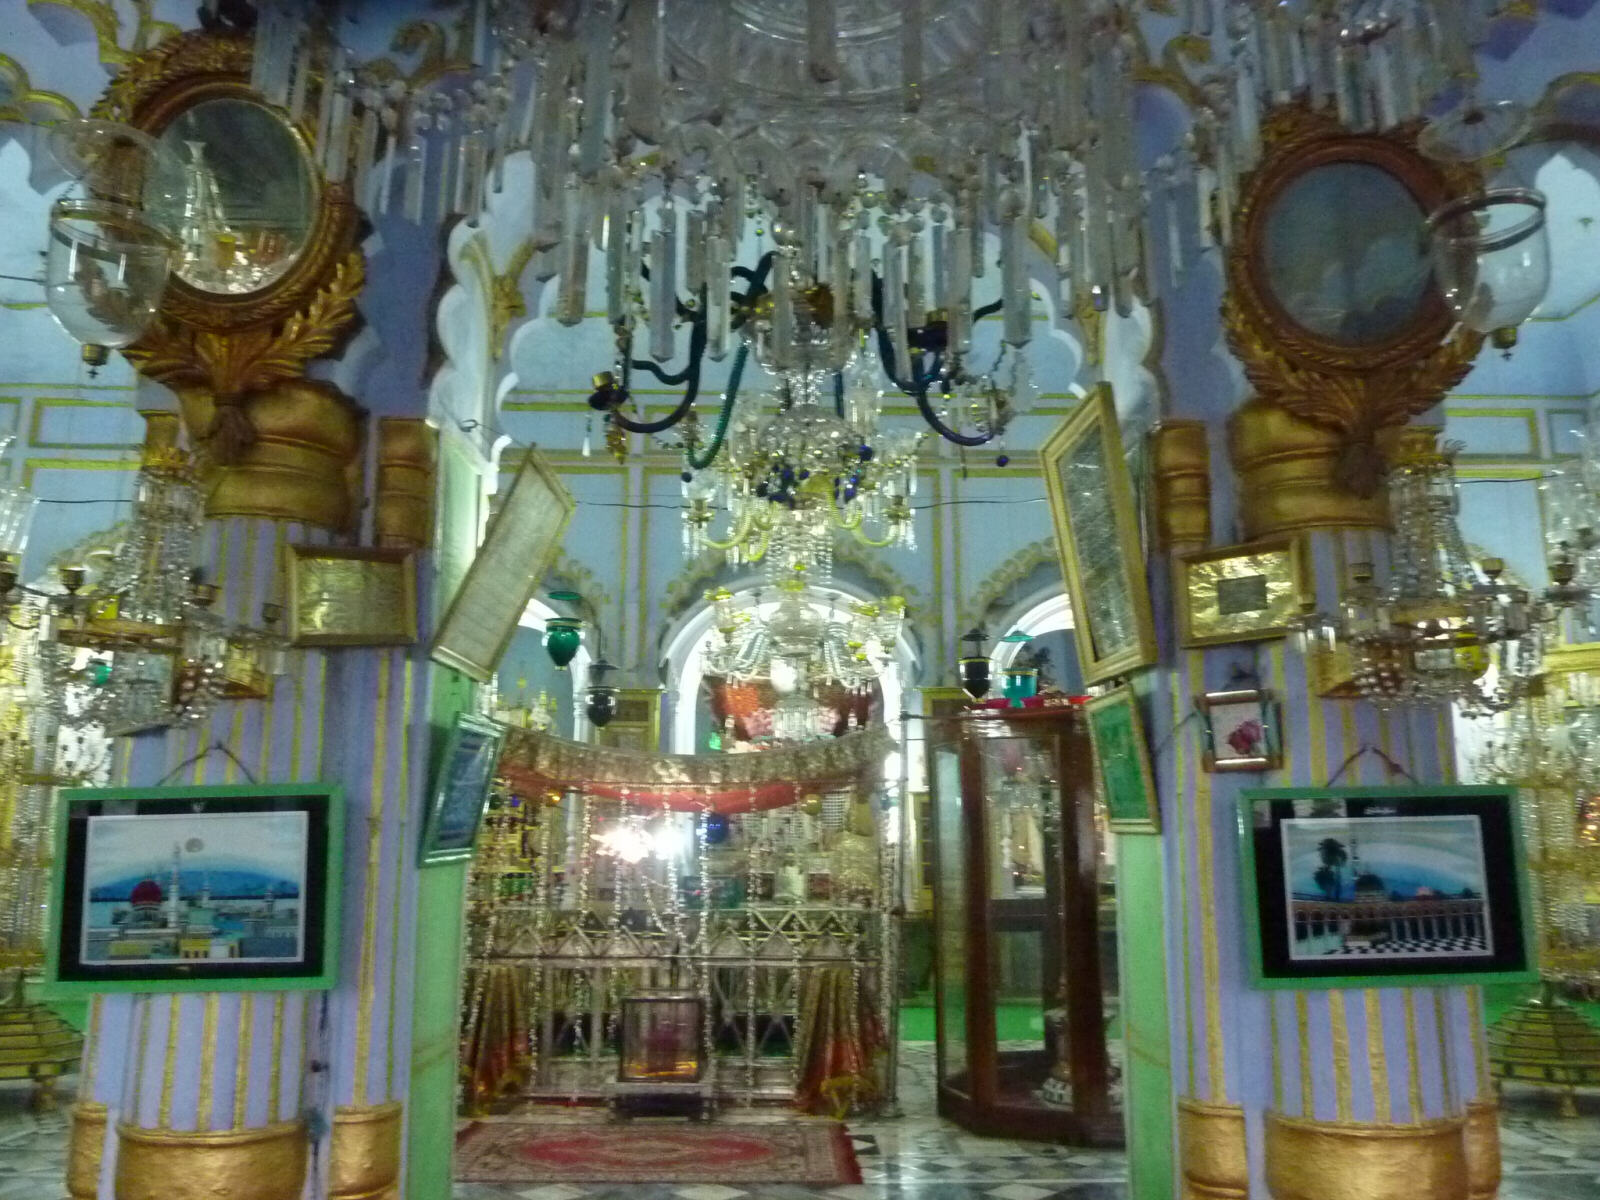 Inside the Chota Imambra in Lucknow, India